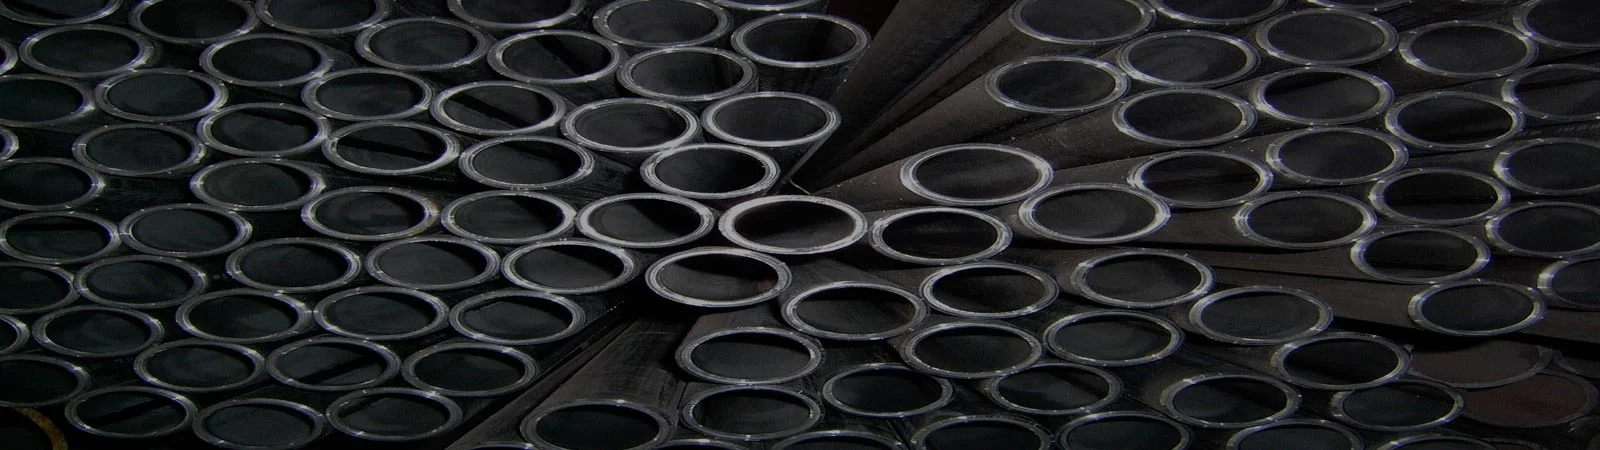 ERP Software For Pipes & Tubes Industry 